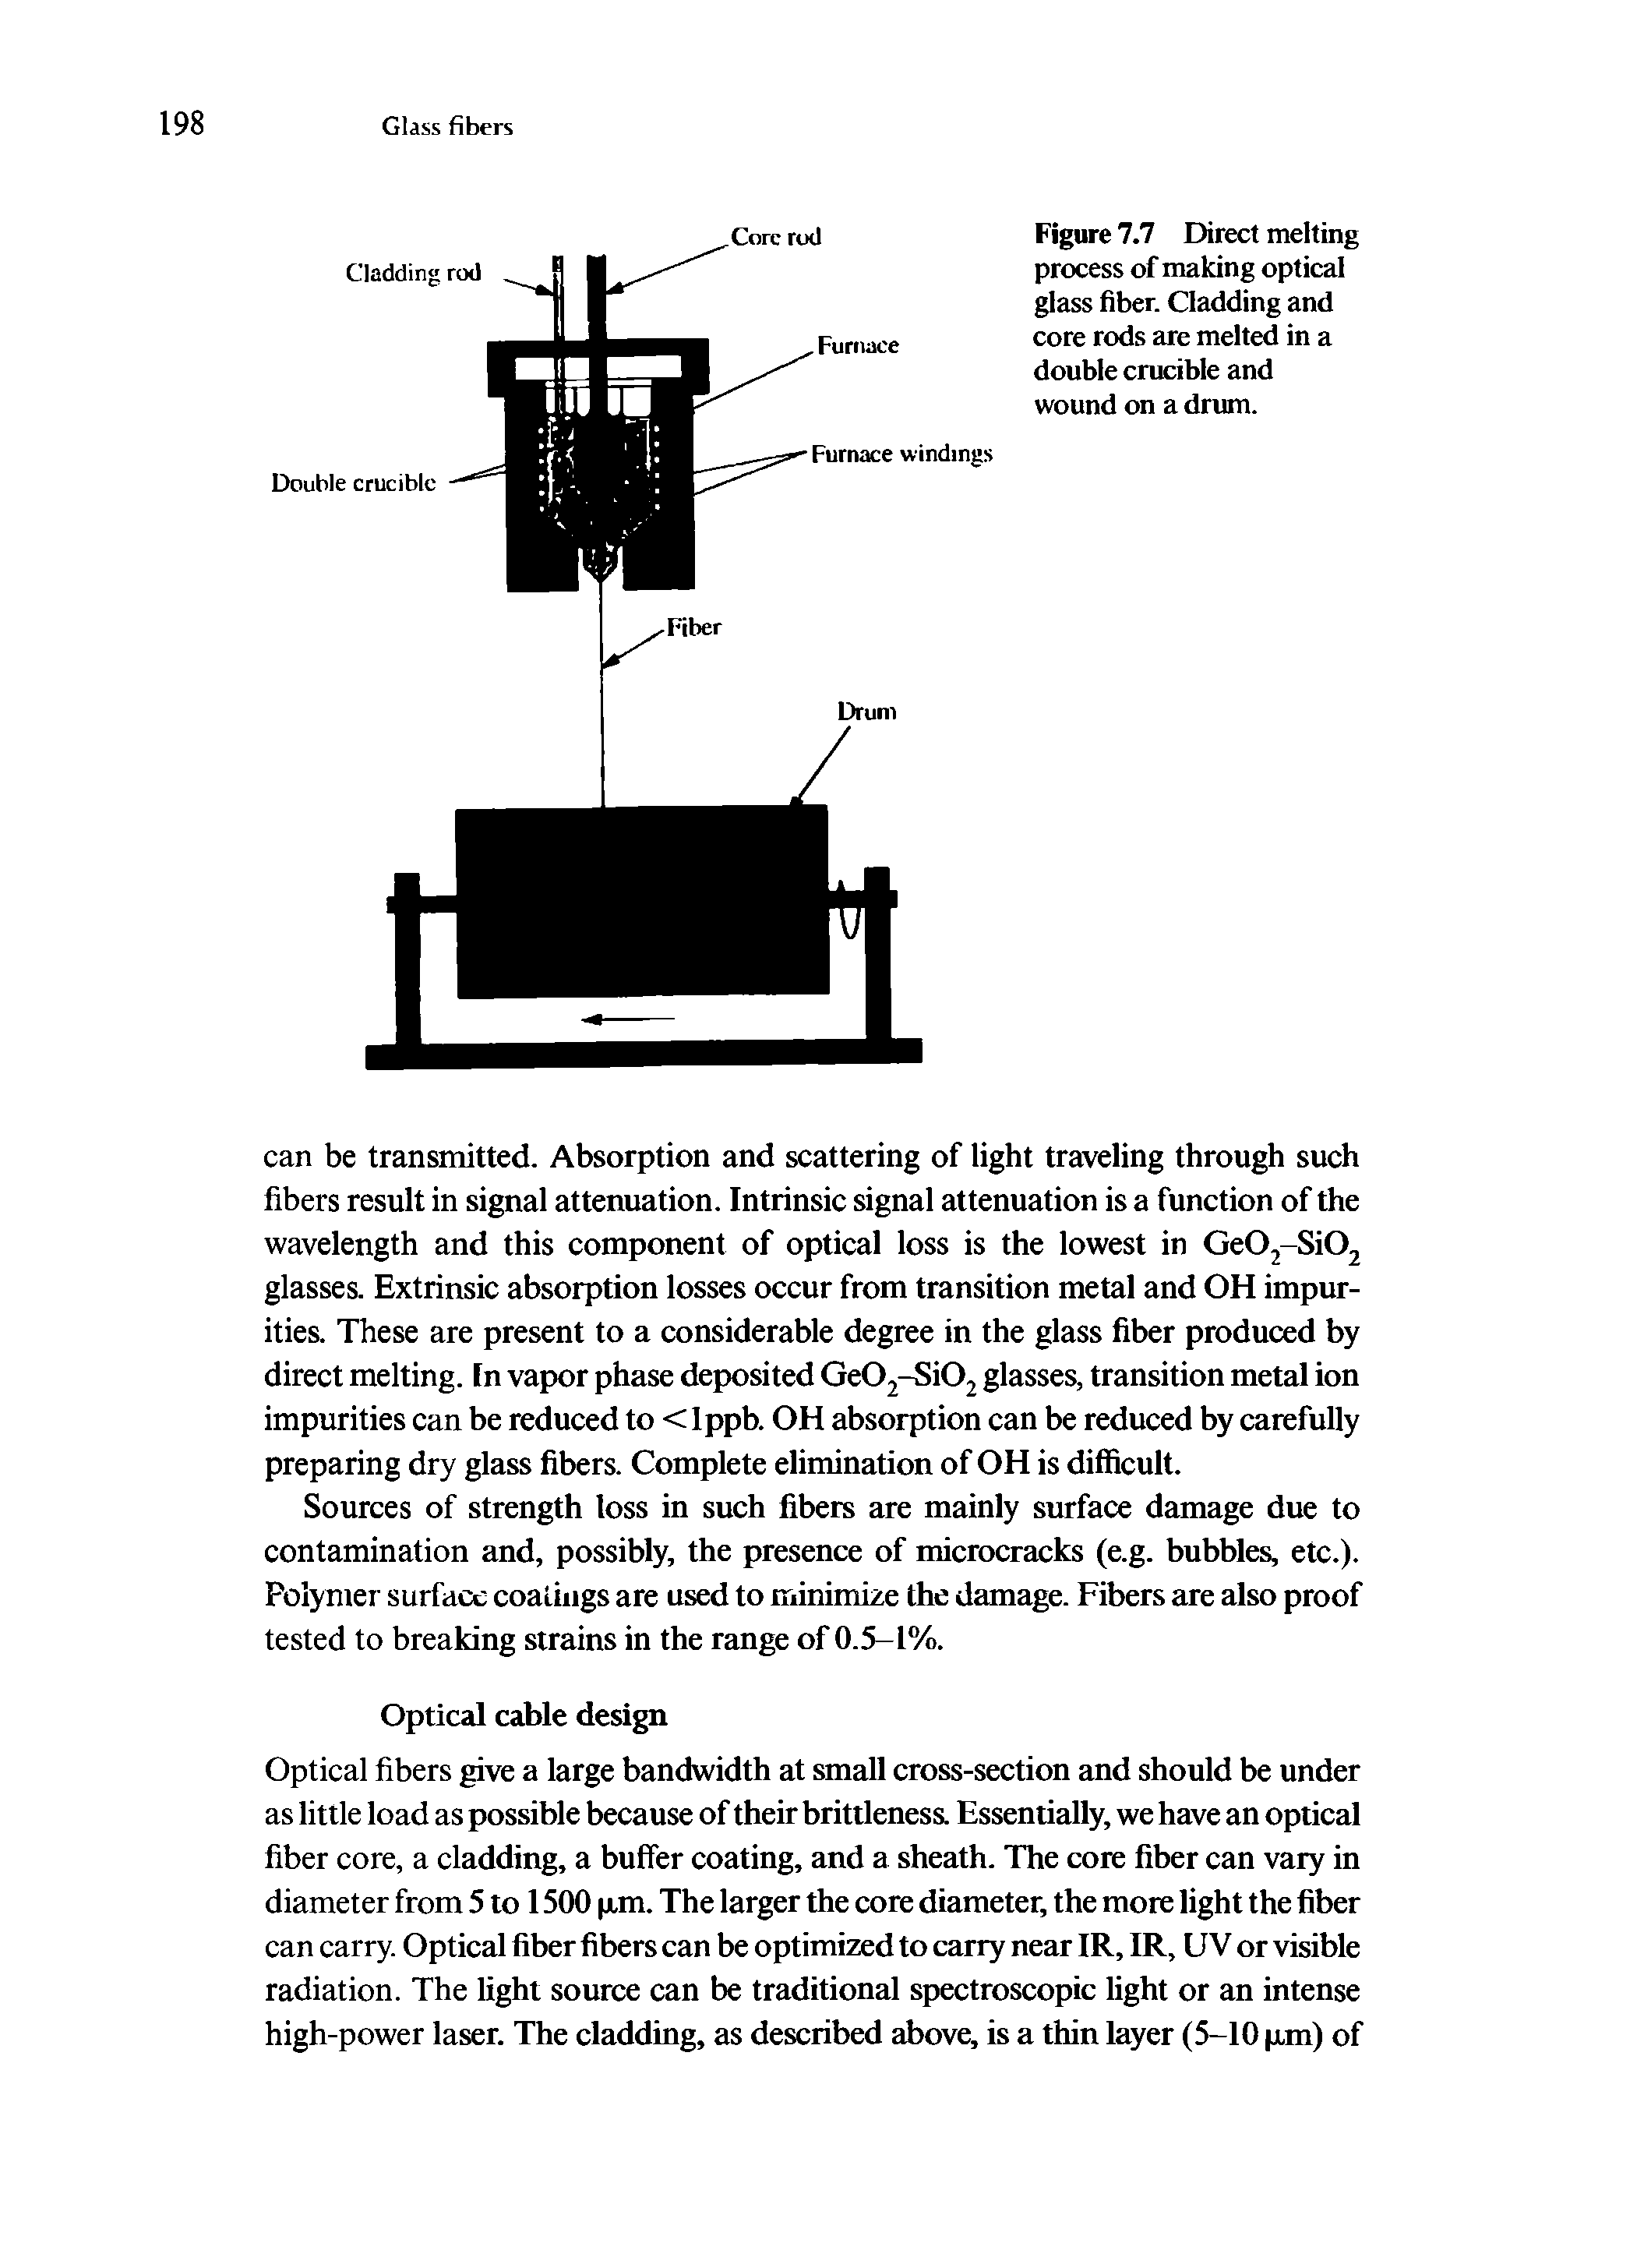 Figure 7.7 Direct melting process of making optical glass fiber. Qadding and core rods are melted in a double crucible and wound on a drum.